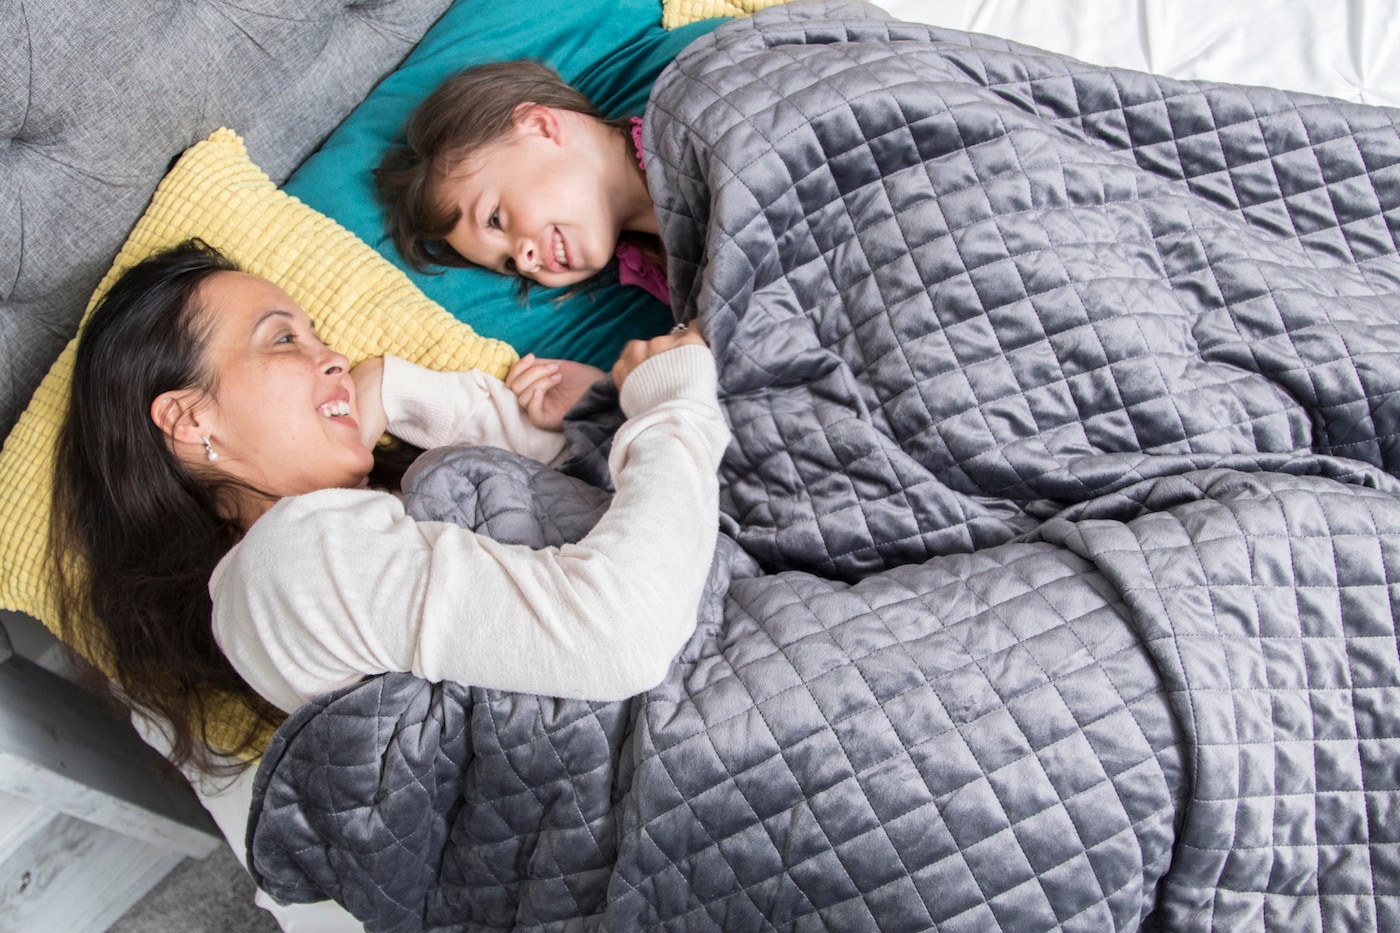 Are weighted blankets safe for kids? Weighing up the pros and cons